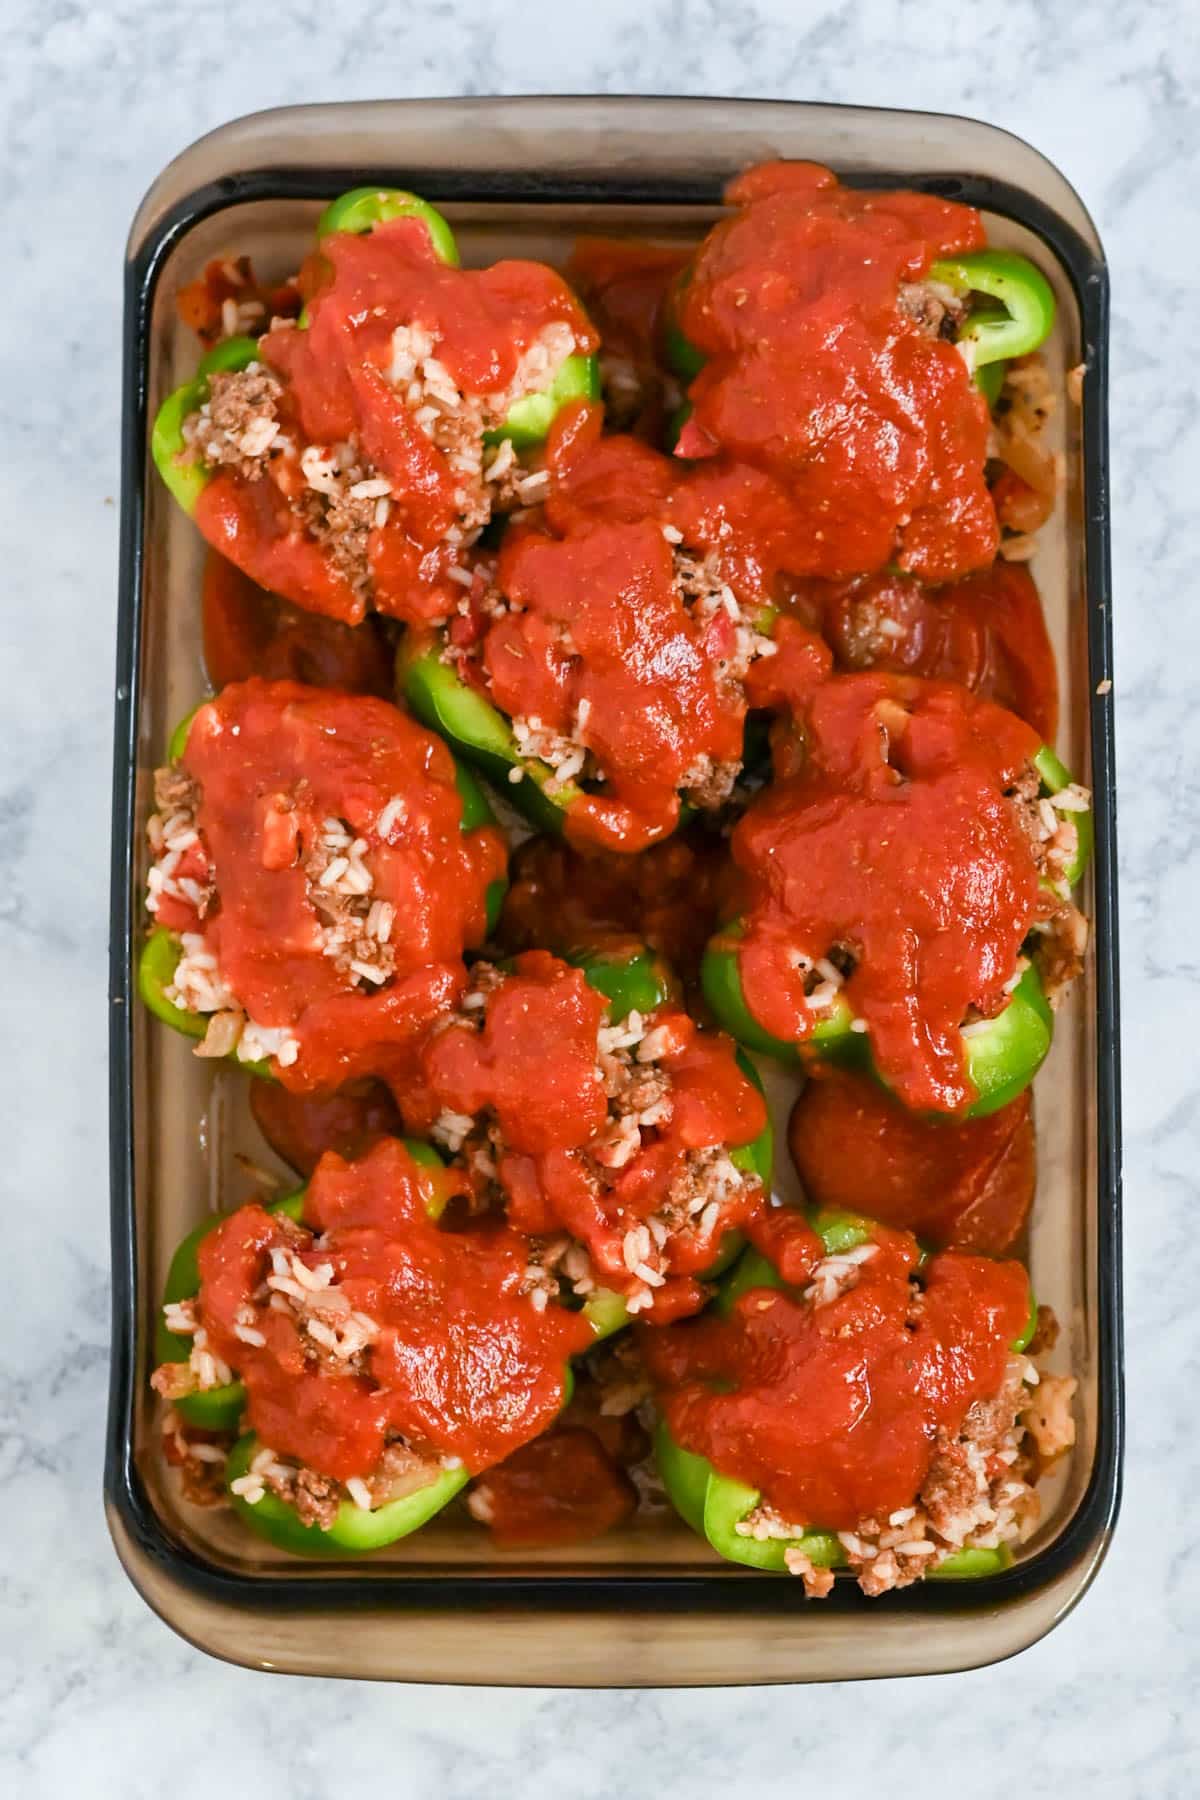 A tray of baked green bell peppers stuffed with rice and ground meat, topped with red sauce.